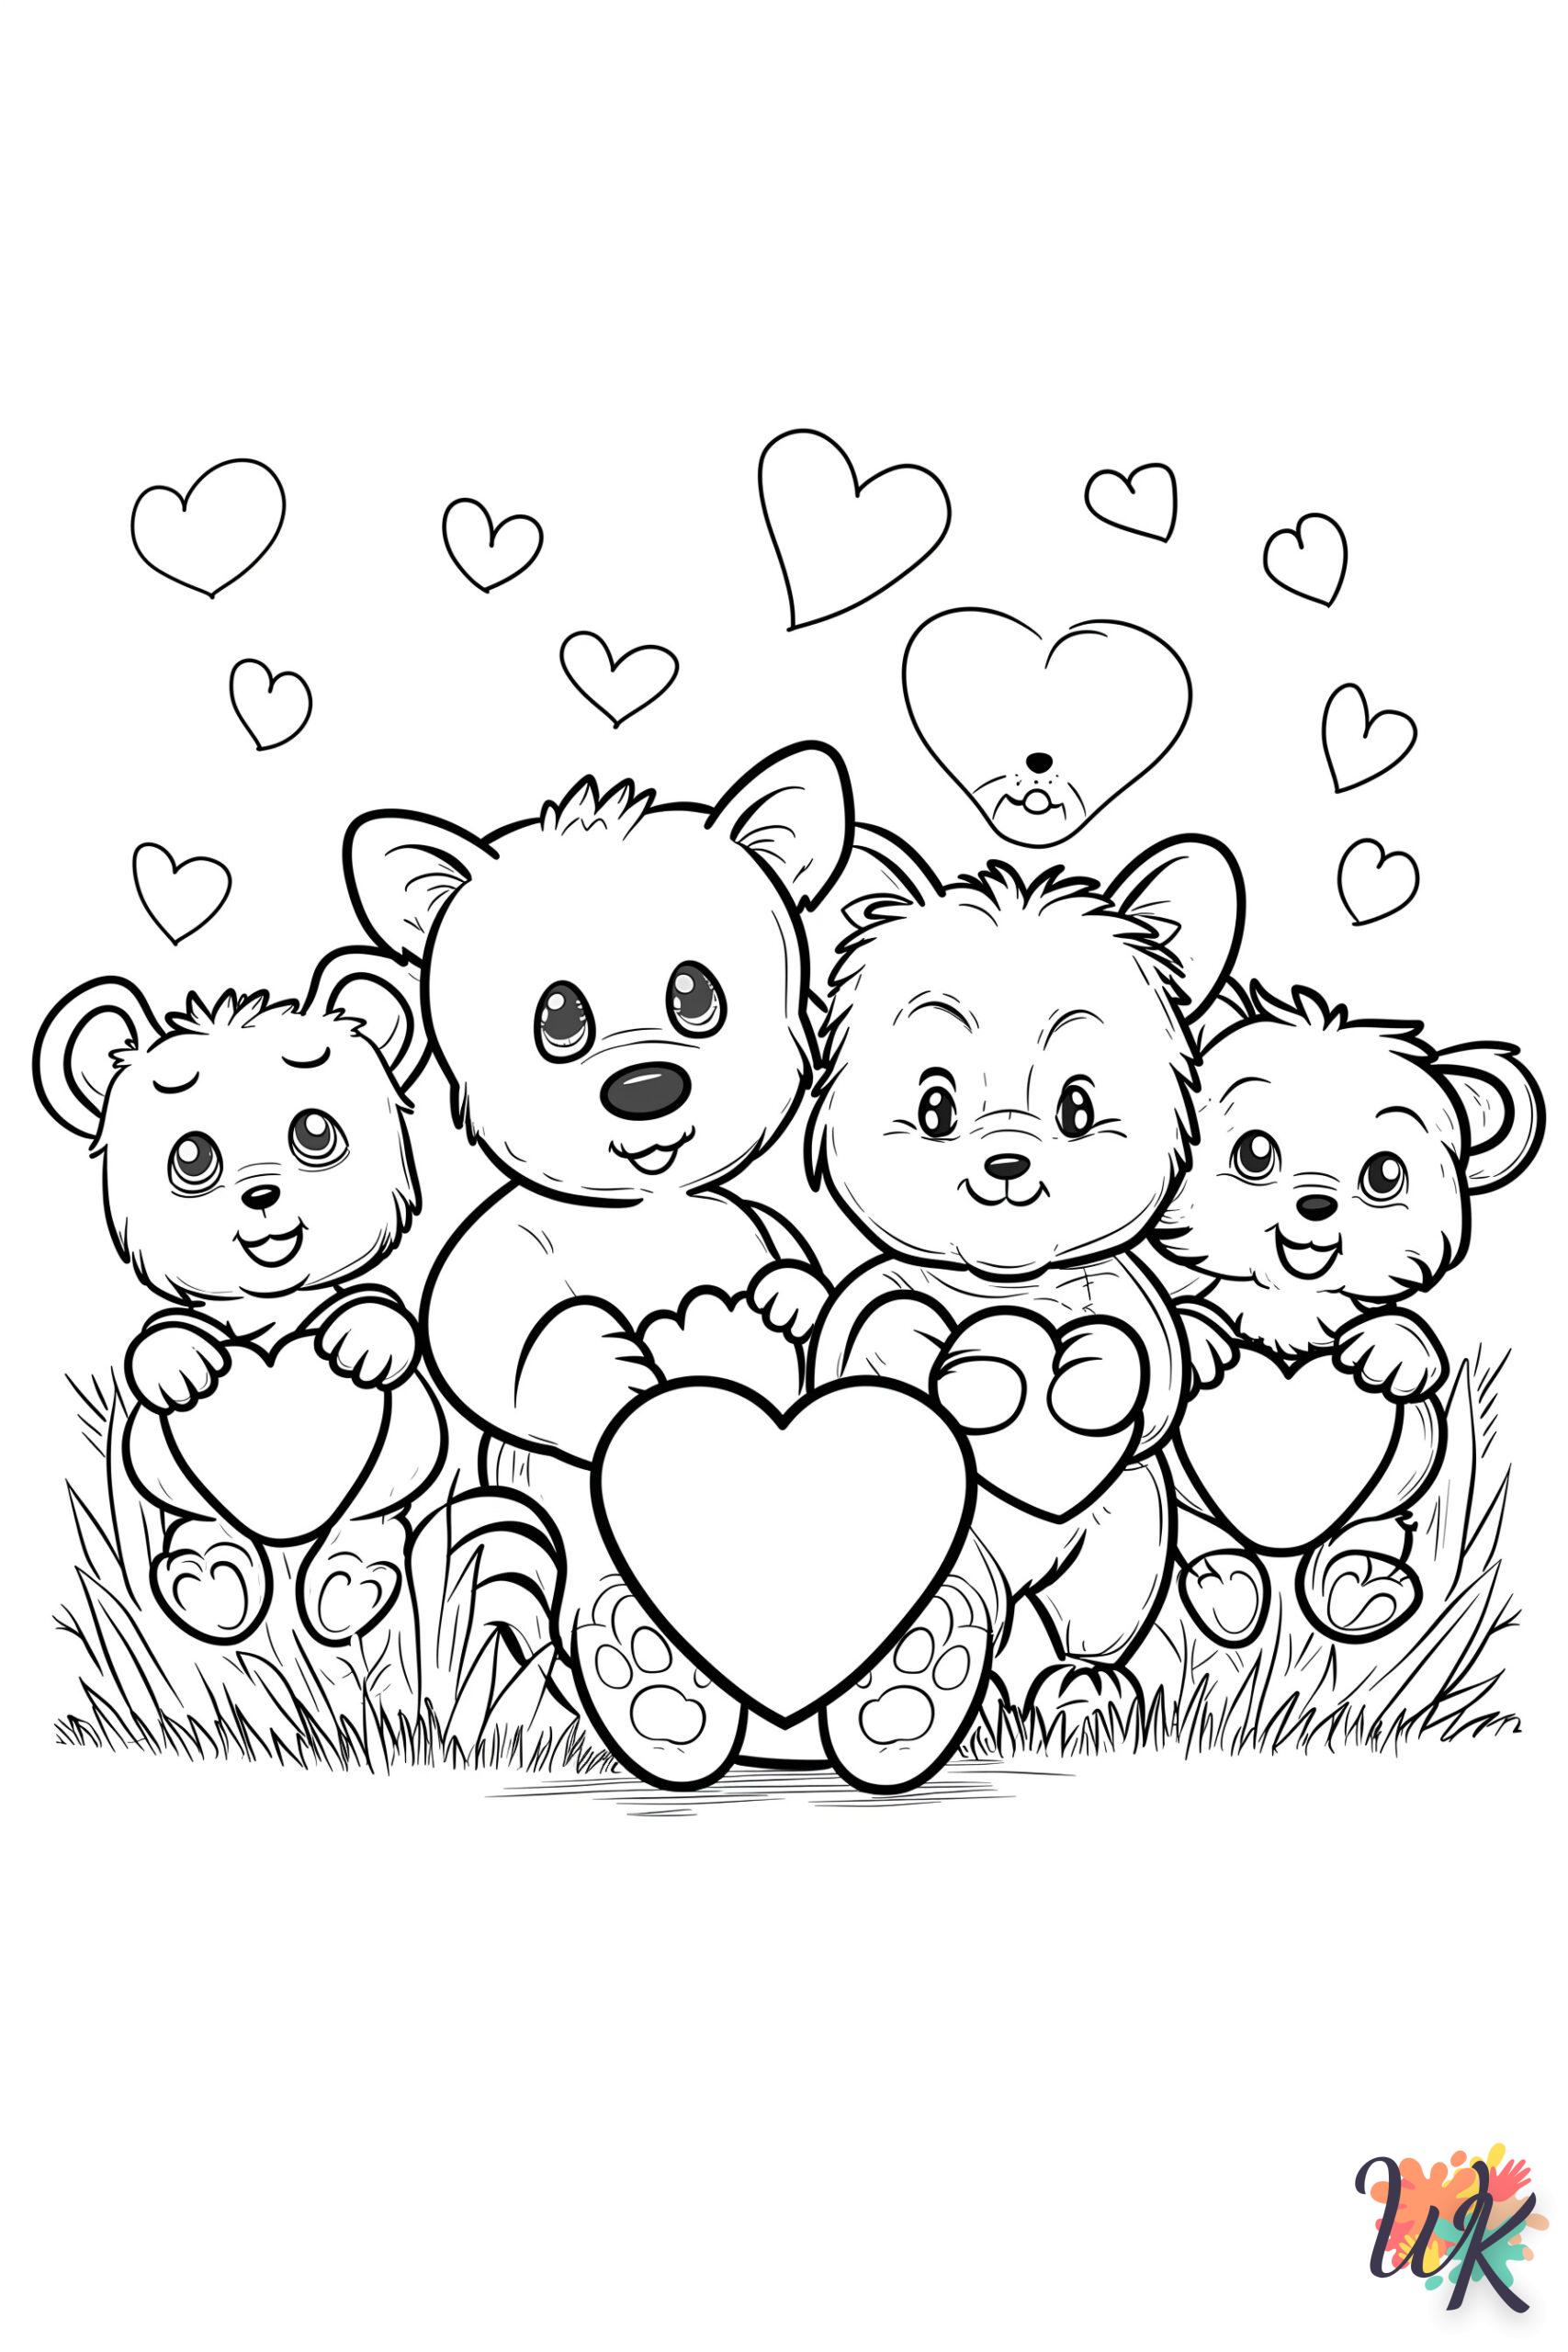 Heart coloring page to print for 4 year olds